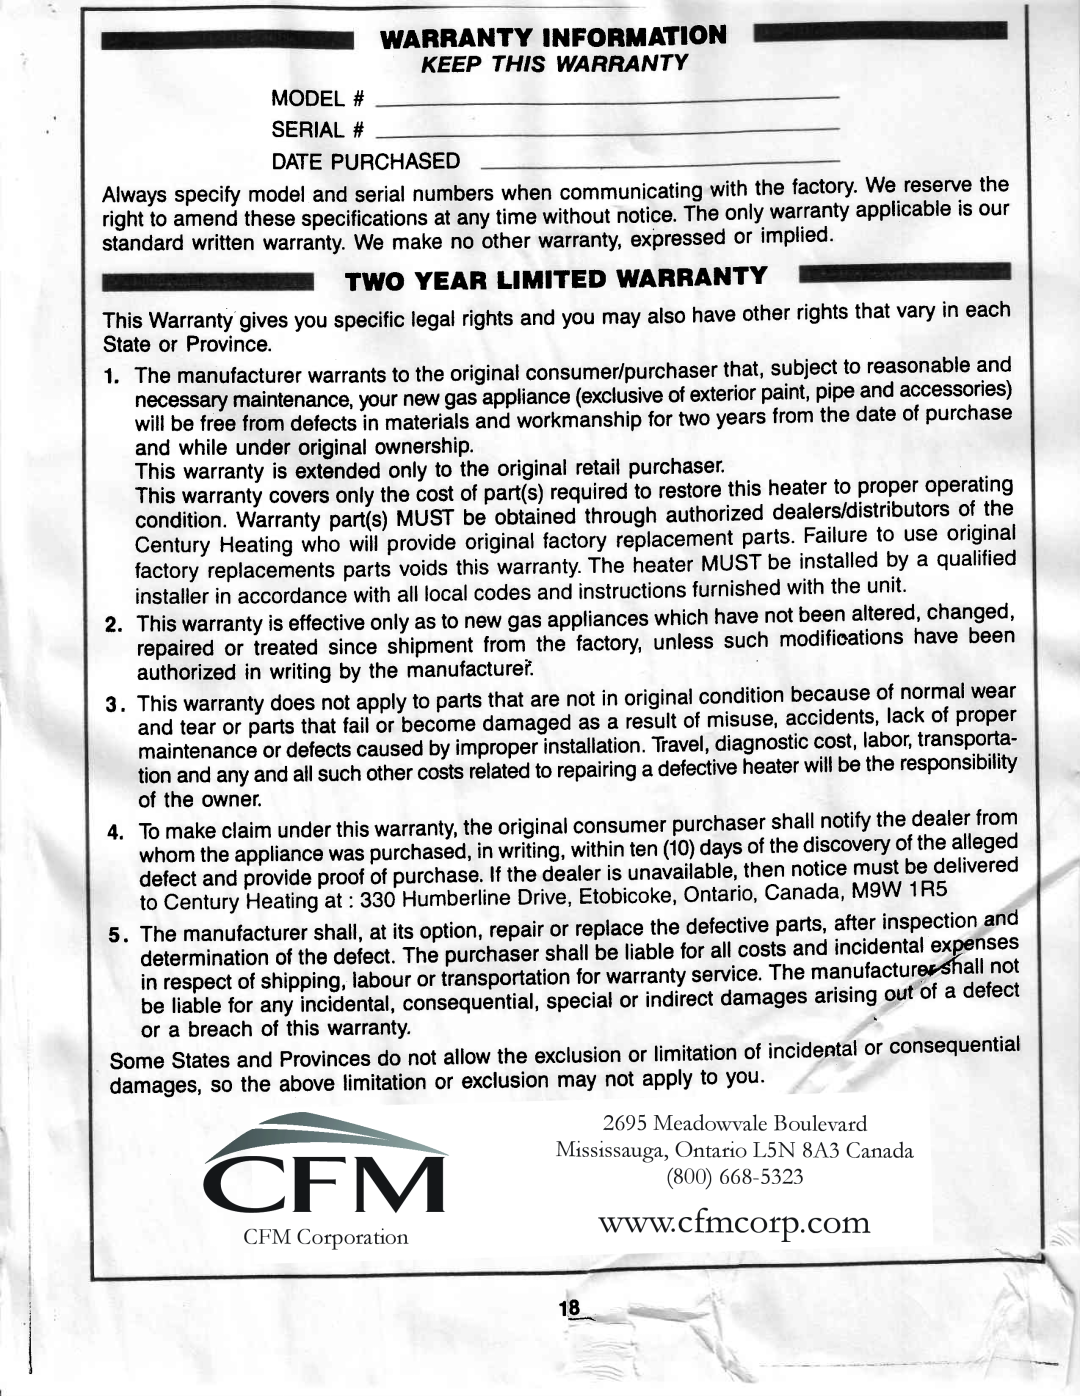 Vermont Casting G400 owner manual CFM Corporation, Meadowvale Boulevard, Mississauga, Ontario L5N 8A3 Canada 